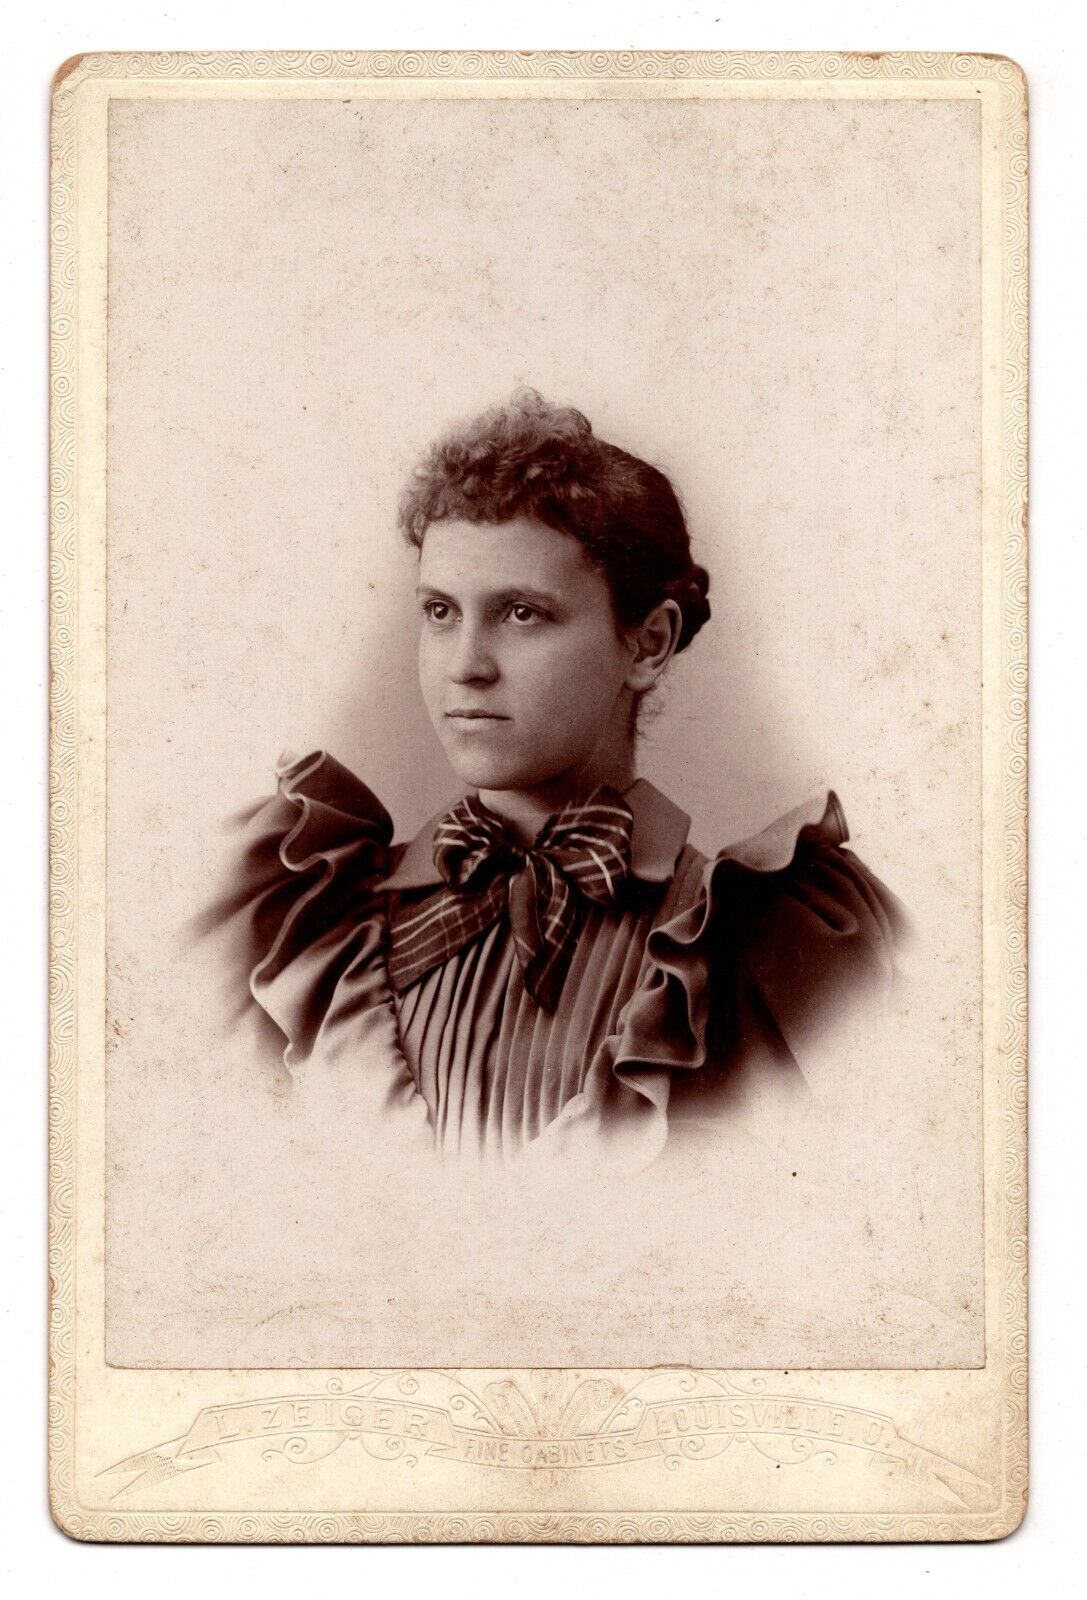 CIRCA 1890s CABINET CARD L. ZEIGER GORGEOUS YOUNG LADY VICTORIAN LOUISVILLE OHIO